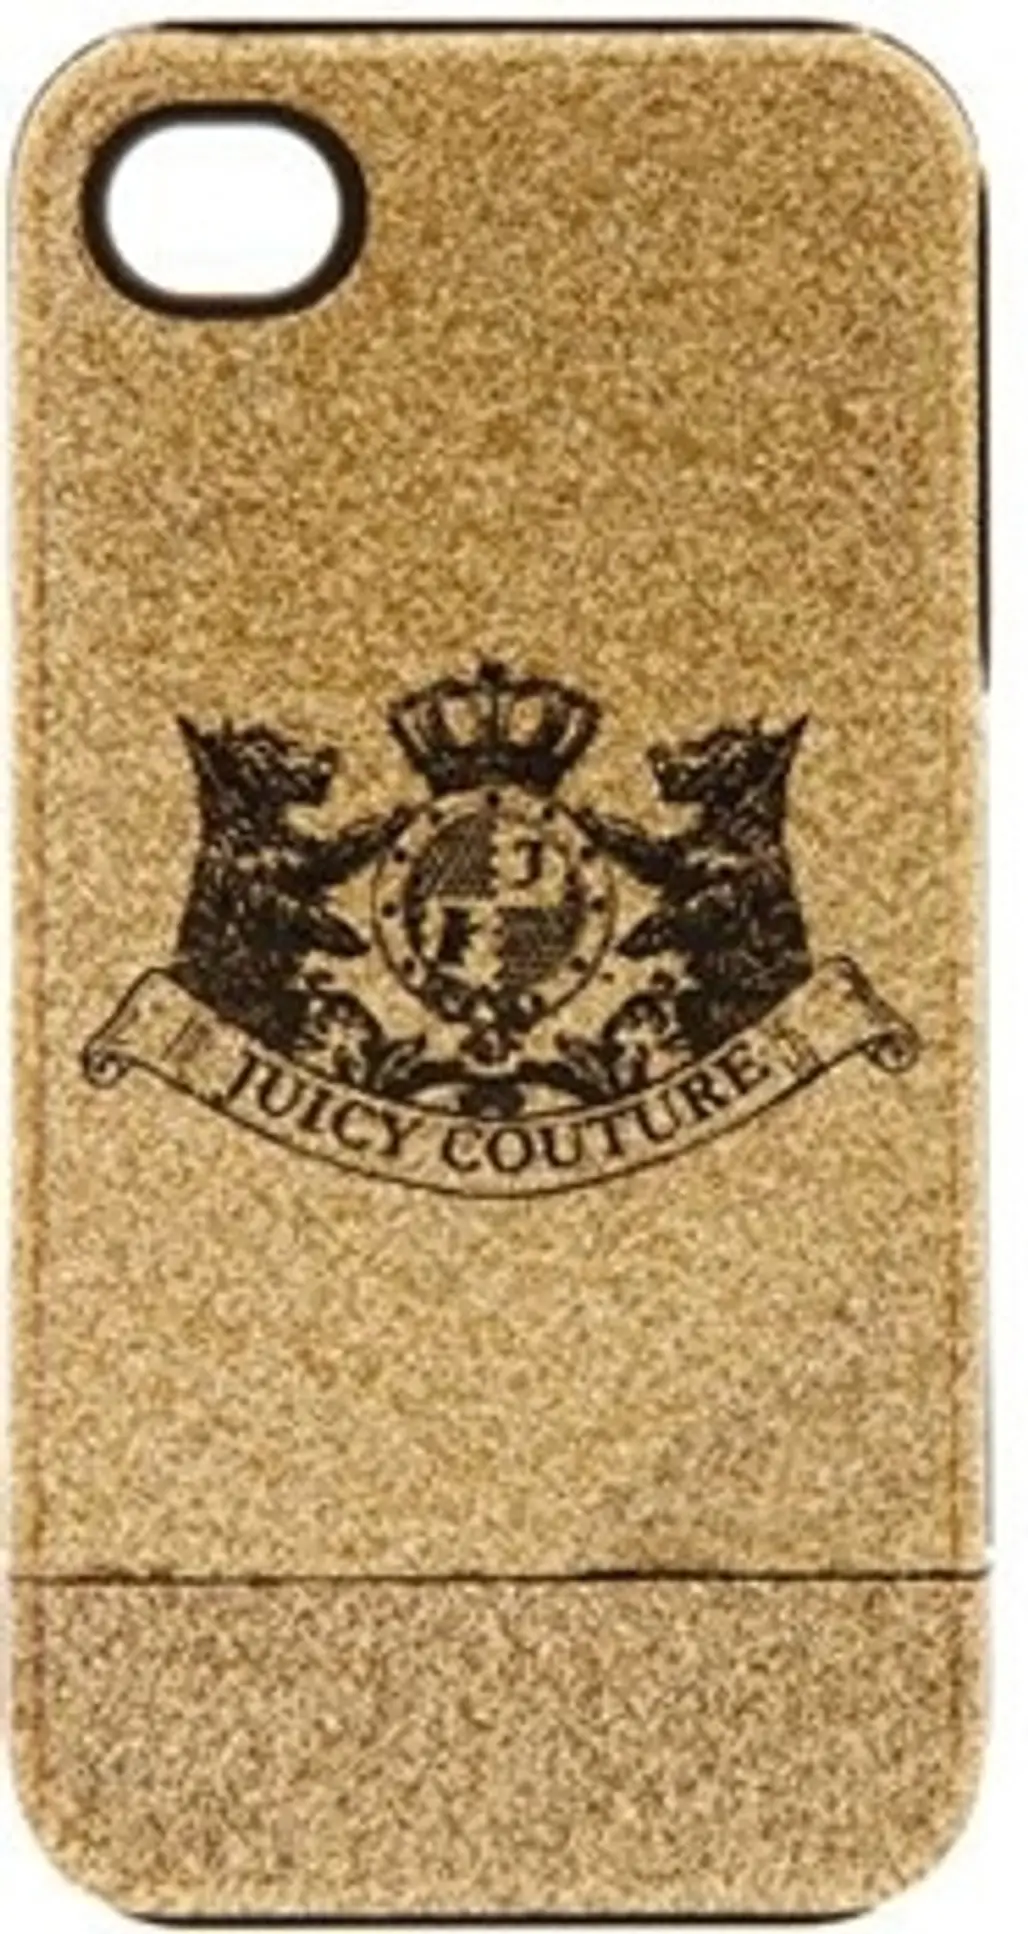 Juicy Couture Glitter IPhone 4 Hard Case